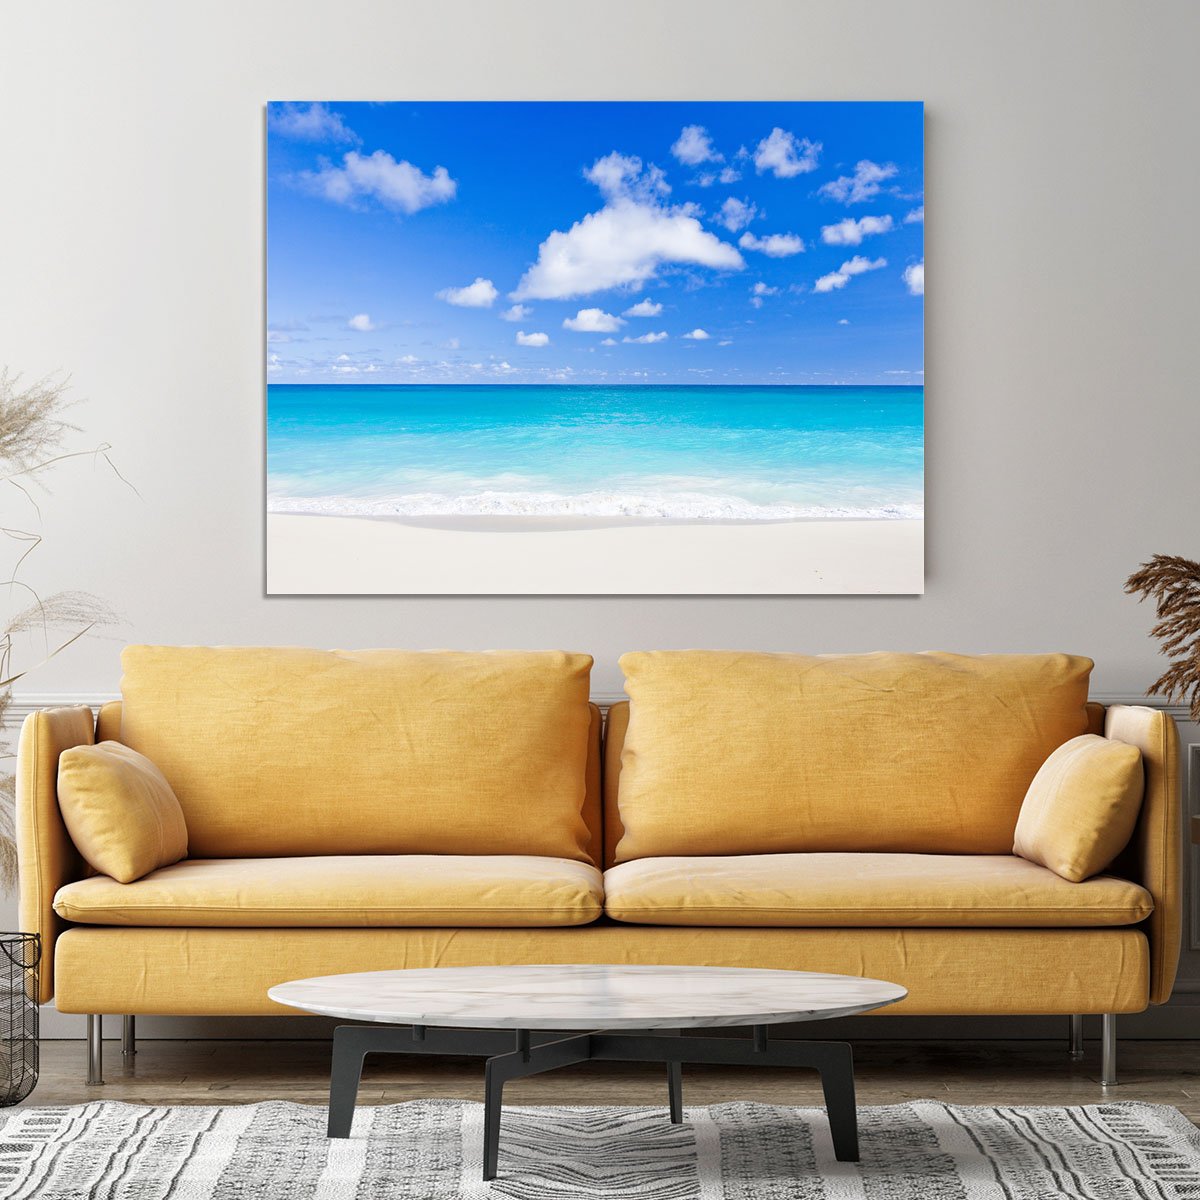 Foul Bay Barbados Canvas Print or Poster